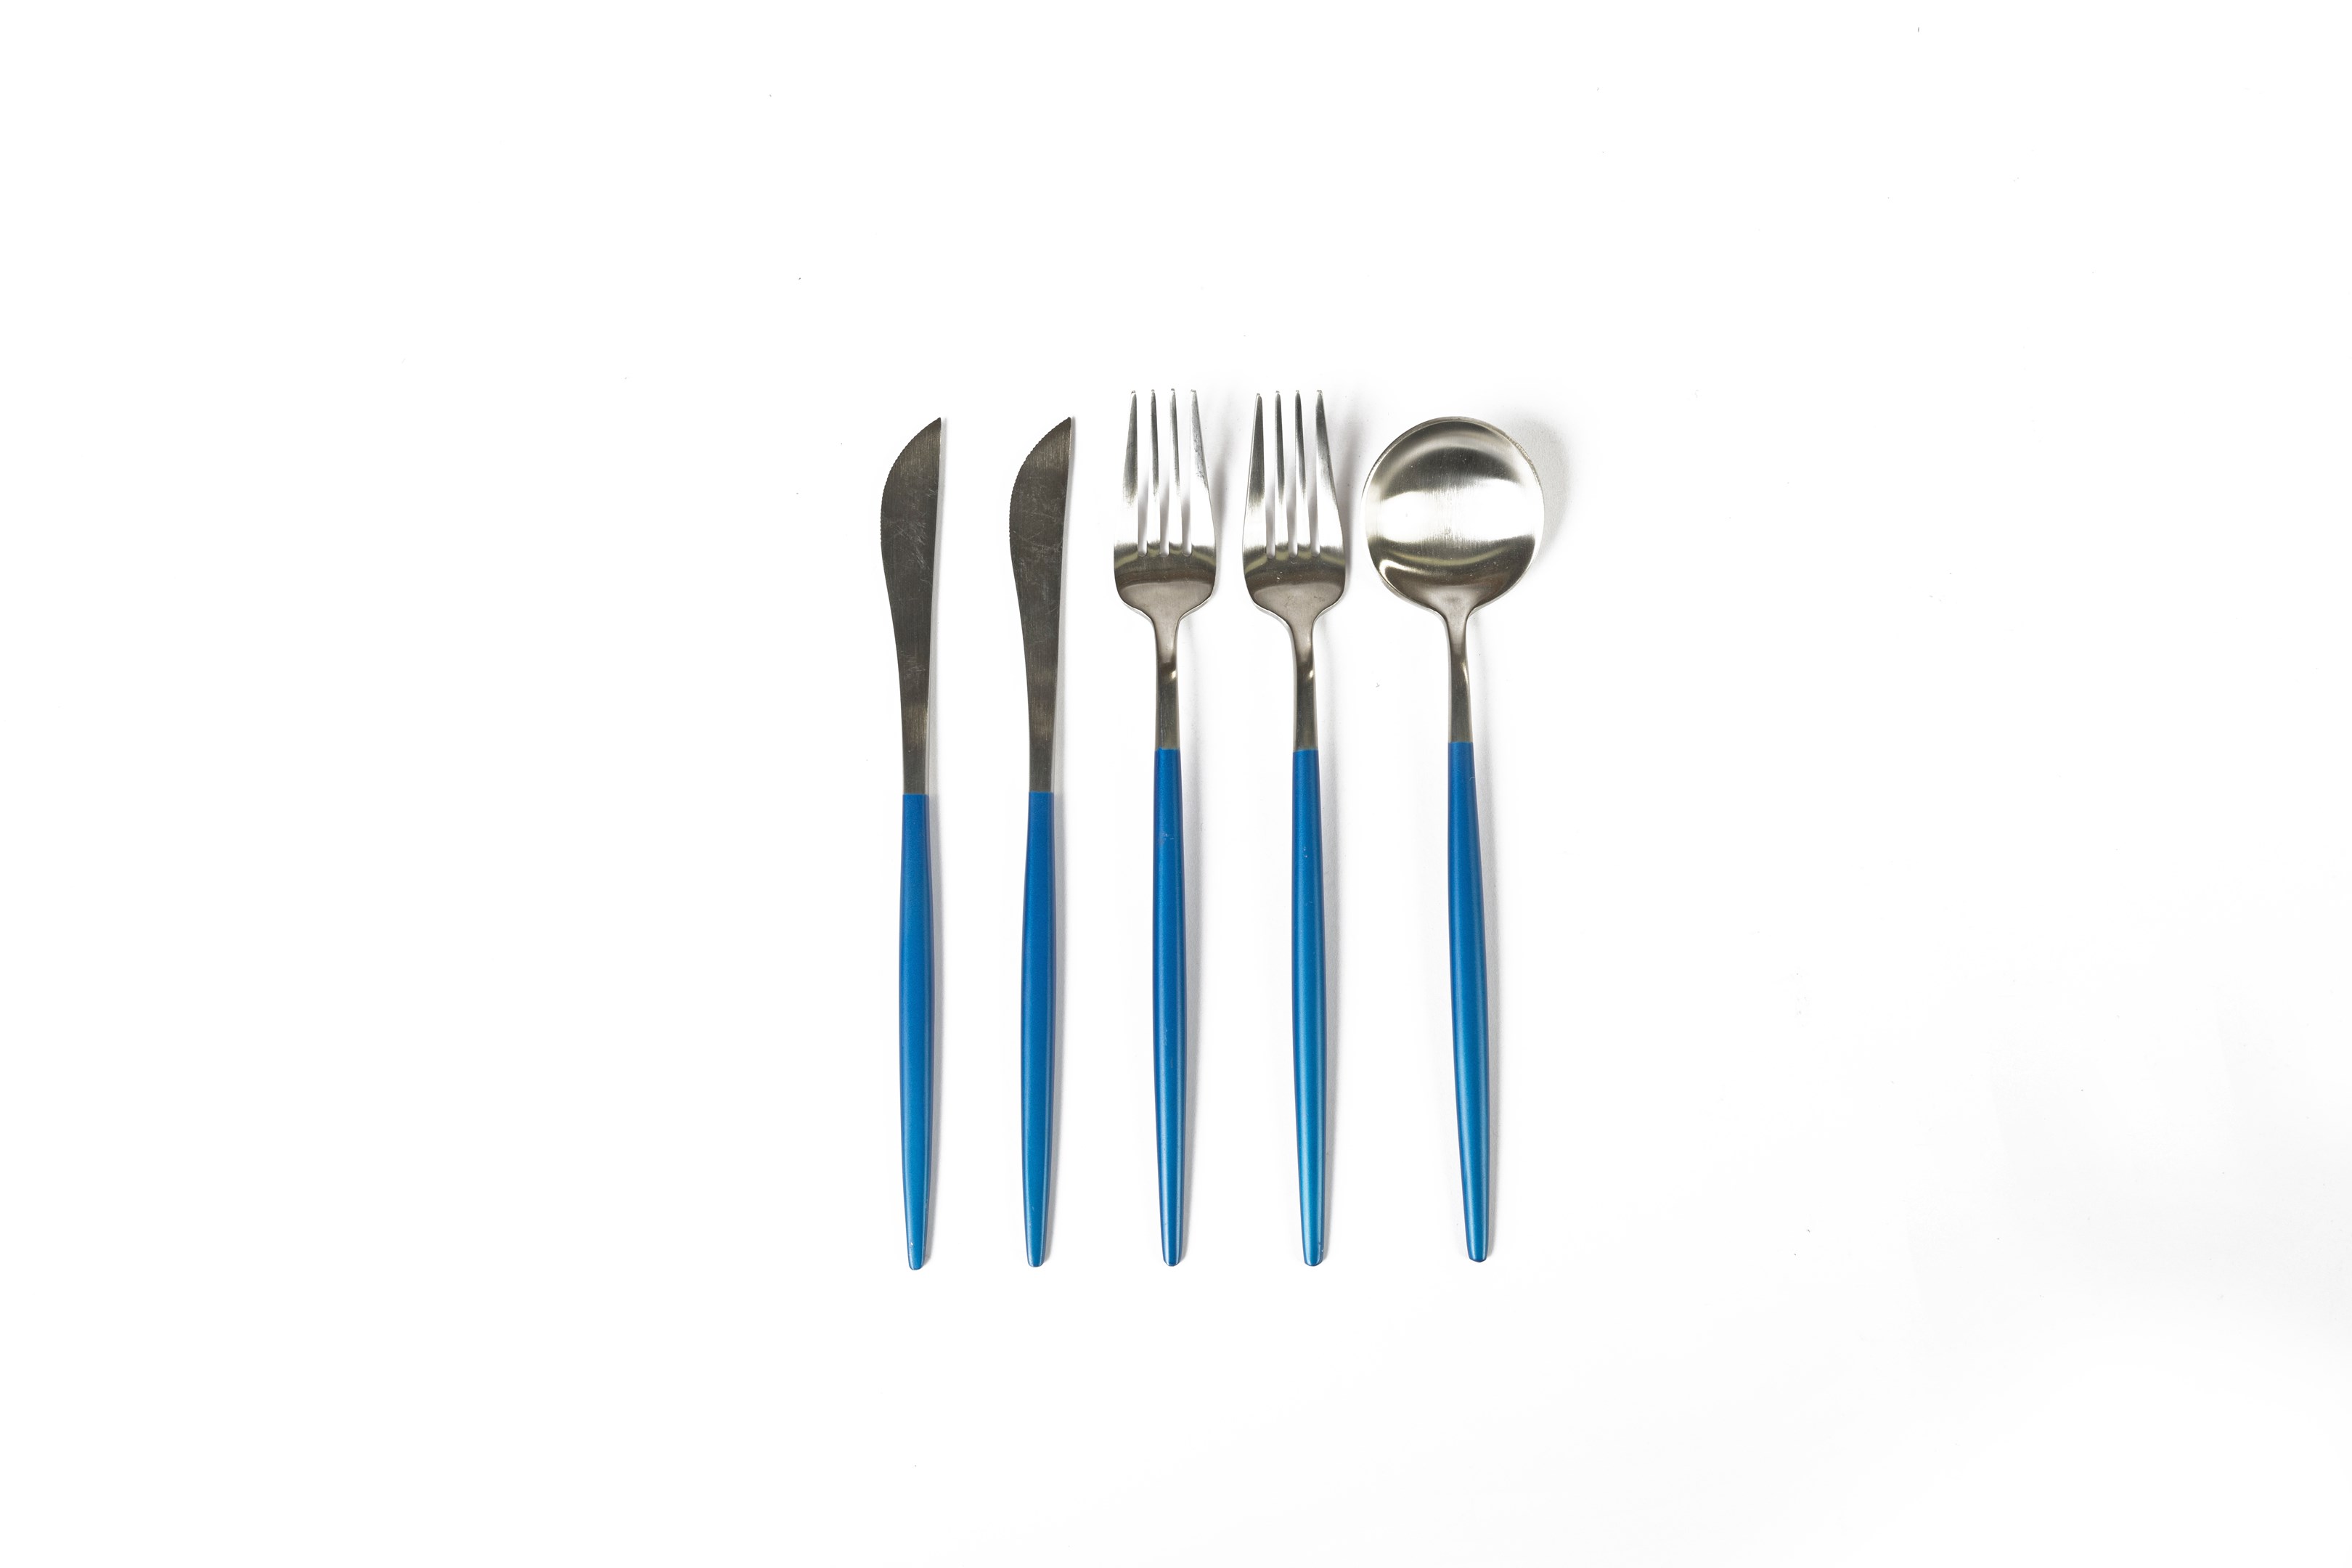 Two Tone Blue and Silver Cutlery Set